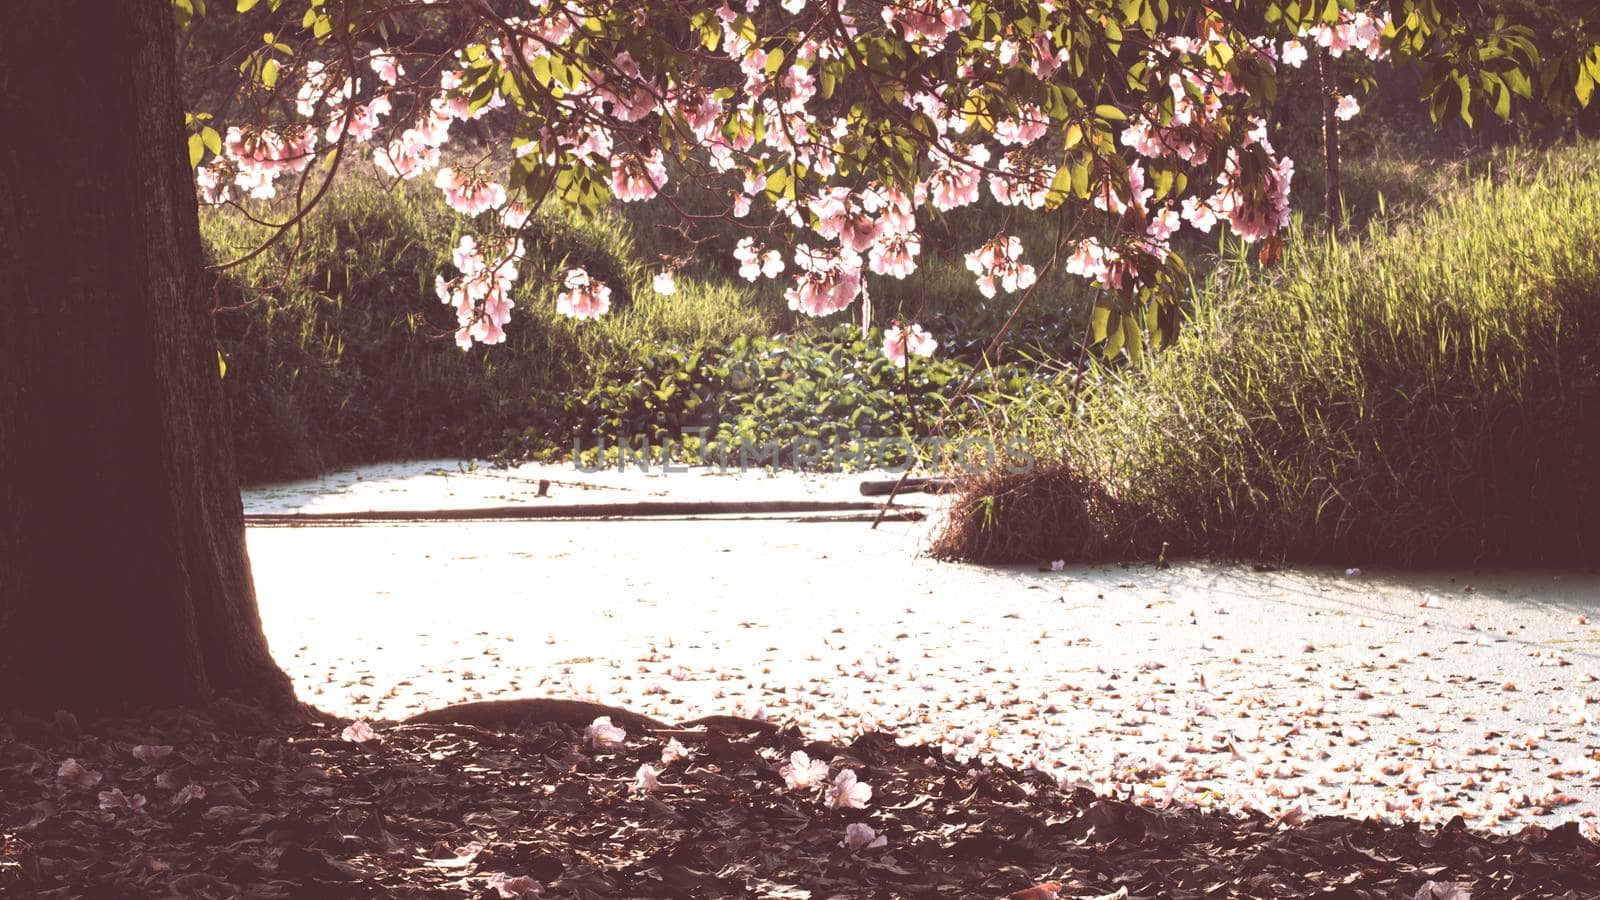 The withered fallen petal of a pink flower lying on the  ground  and cover the surface of water · Pink fallen cherry blossom petals . Beautiful Romantic background .Spring time by Petrichor